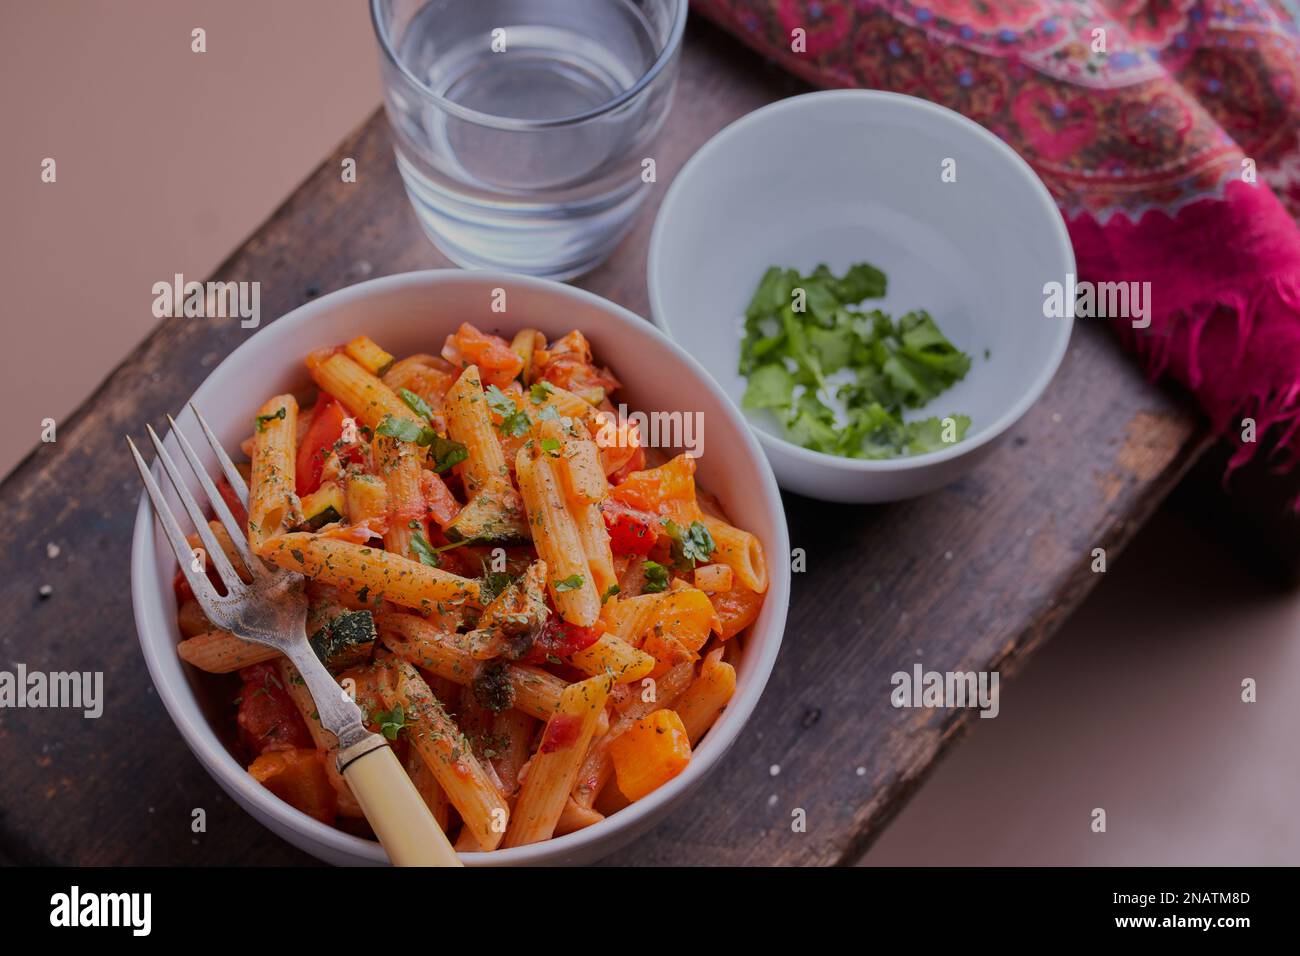 Fish and pasta dish with vegetables shot from above. Stock Photo